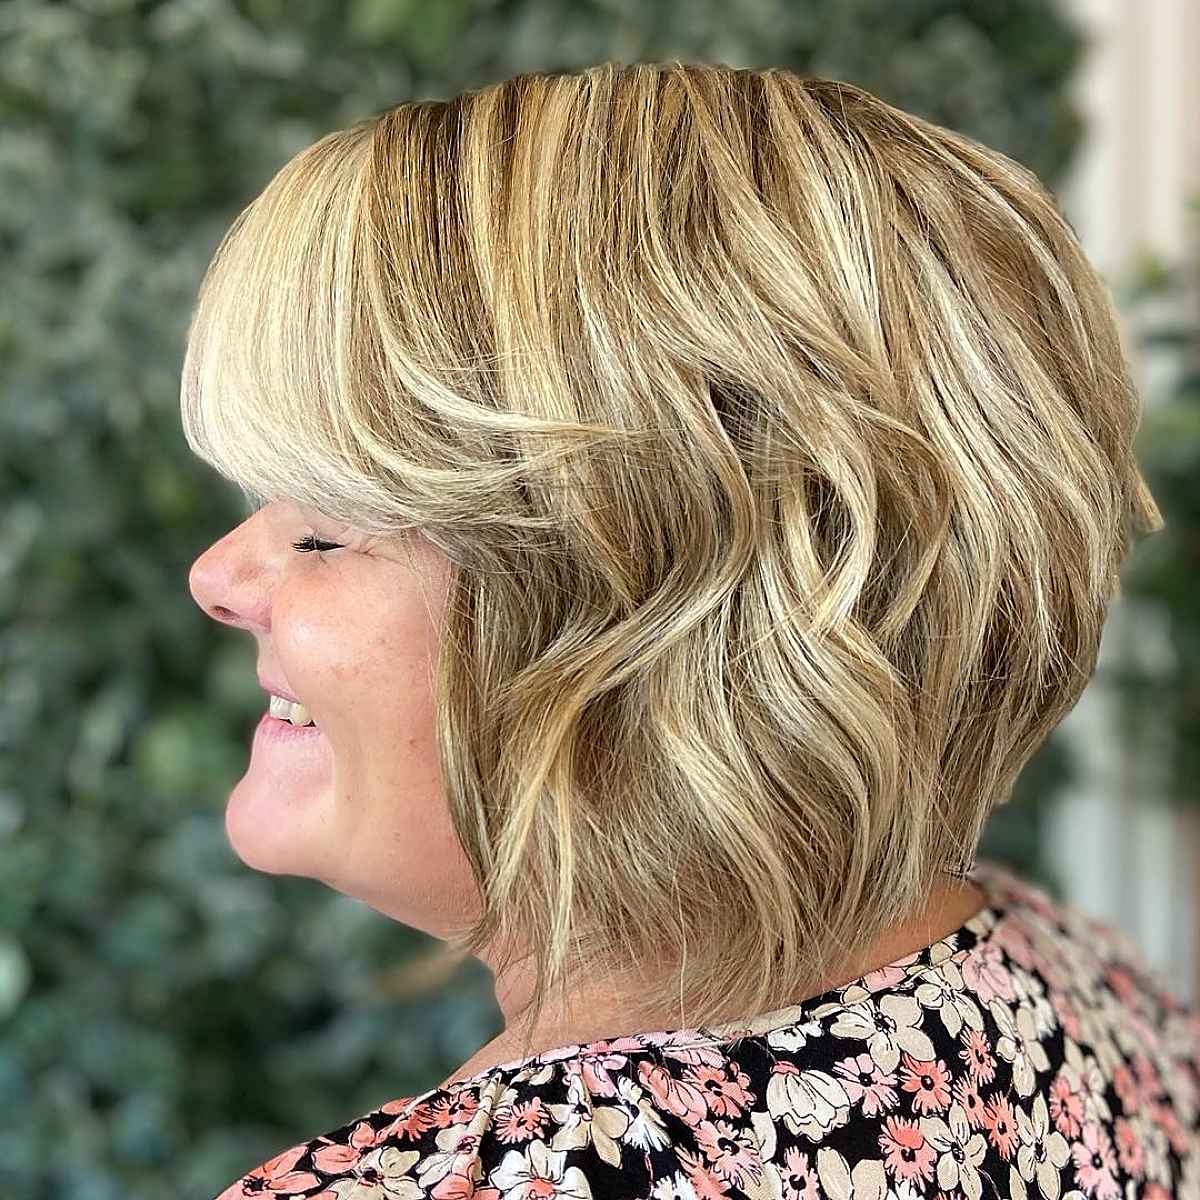 Hairstyles for the heavy-set woman | Hair to make apples and pears look  slimmer